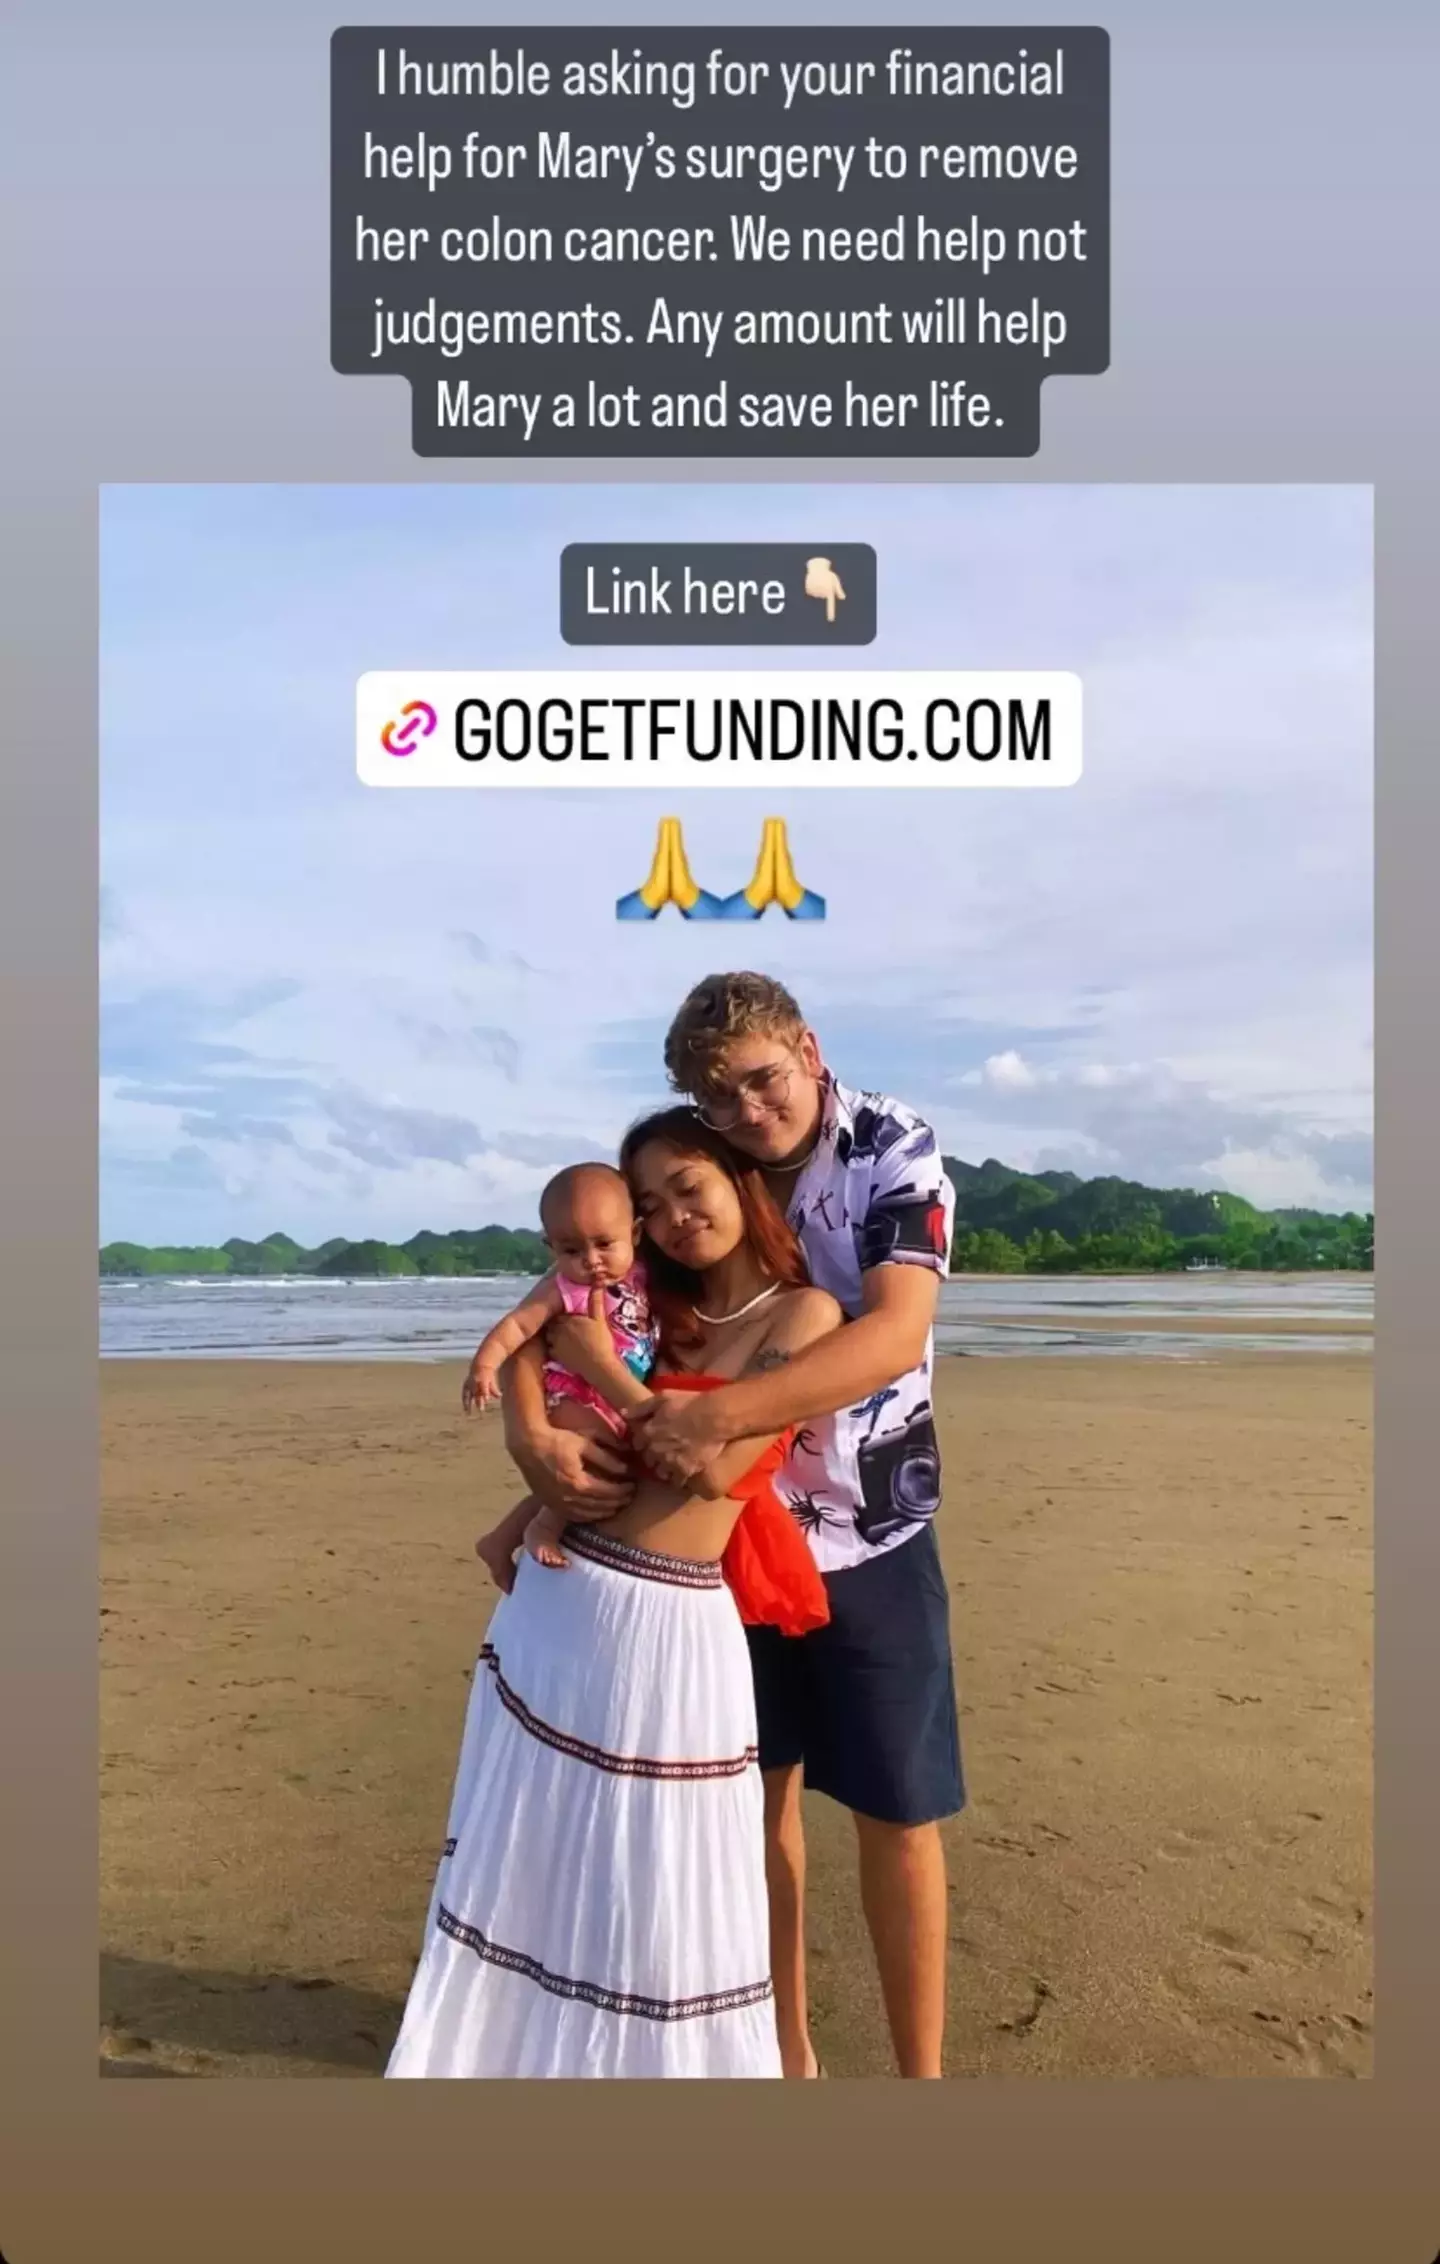 The couple shared a link to a fundraiser for her treatment.